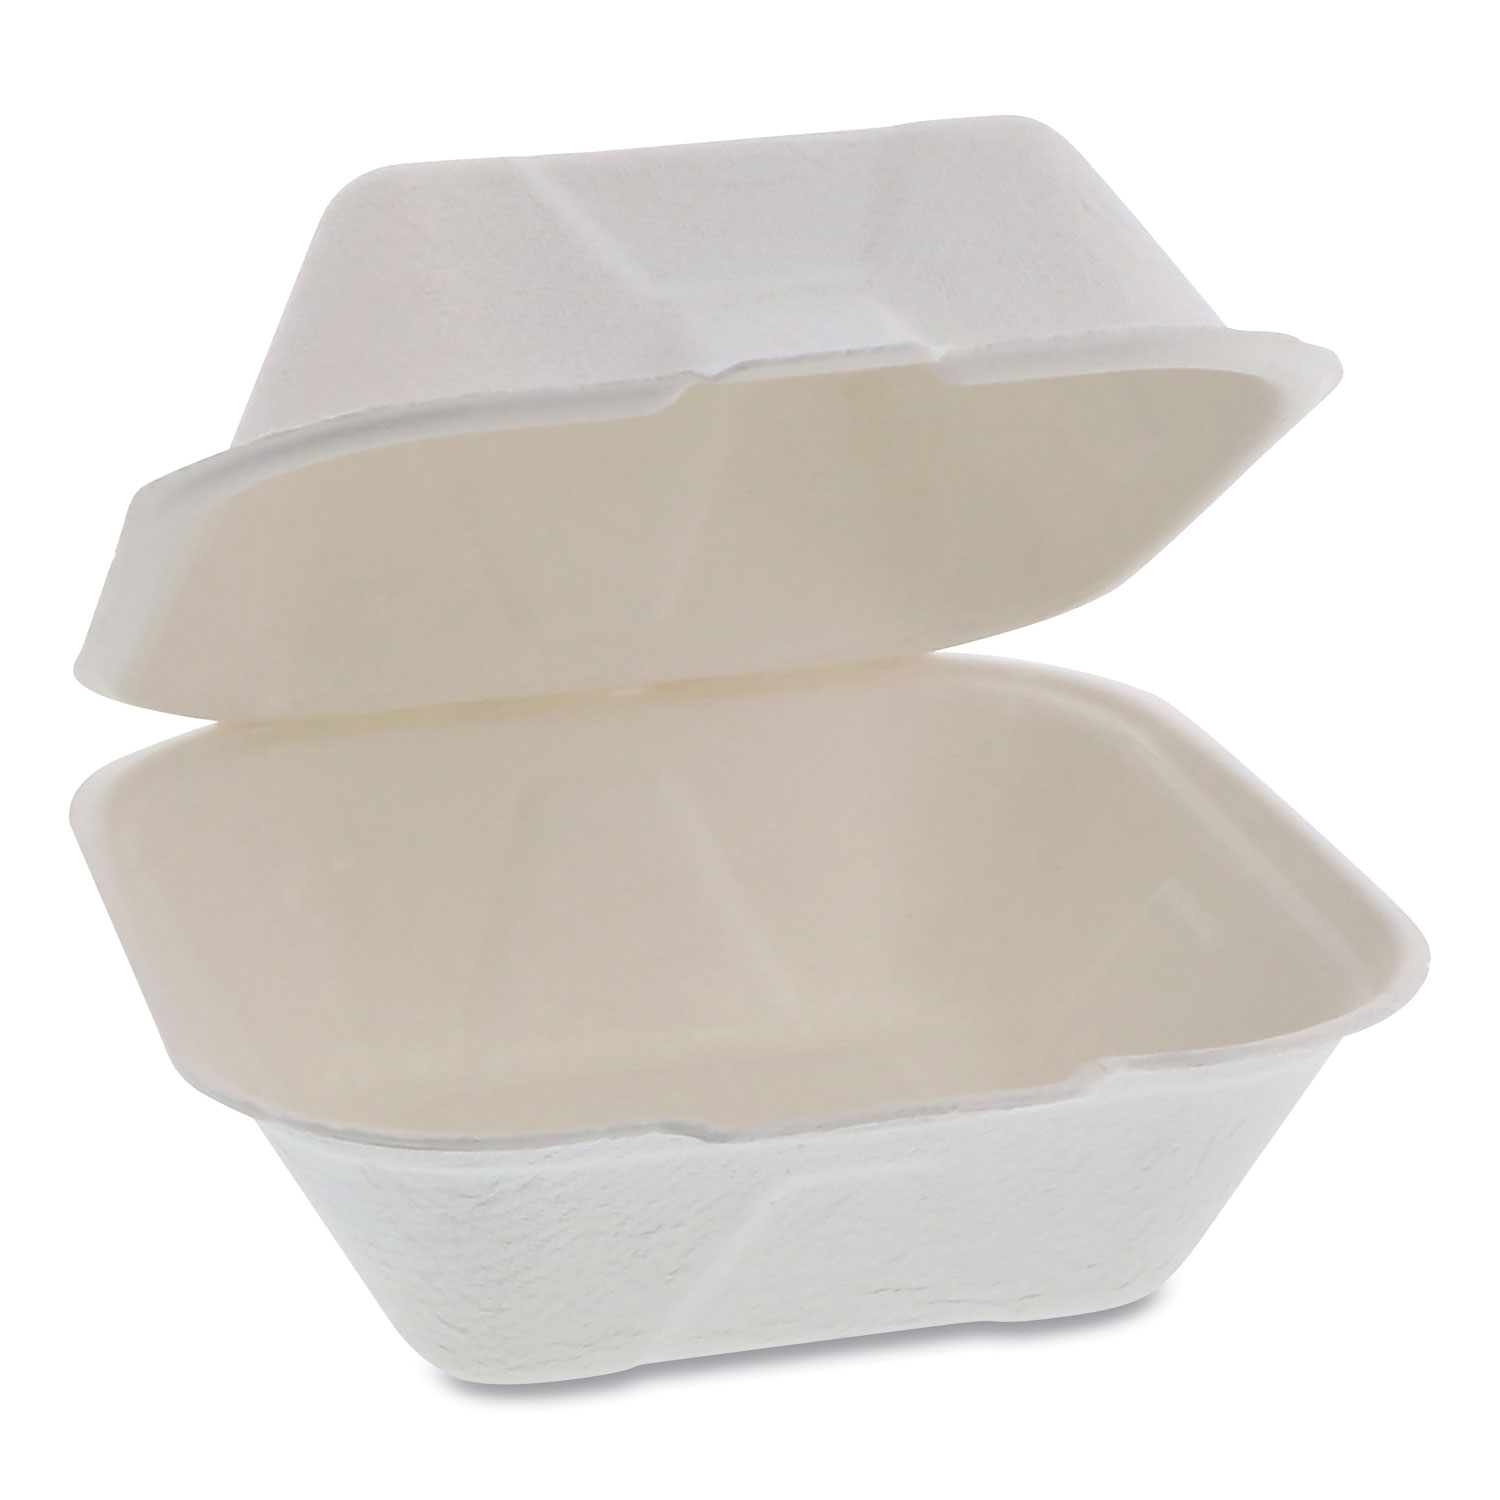 Pactiv EarthChoice Bagasse Hinged Lid Container, 5.8 x 5.8 x 3.3, 1-Compartment, Natural, 500/Carton